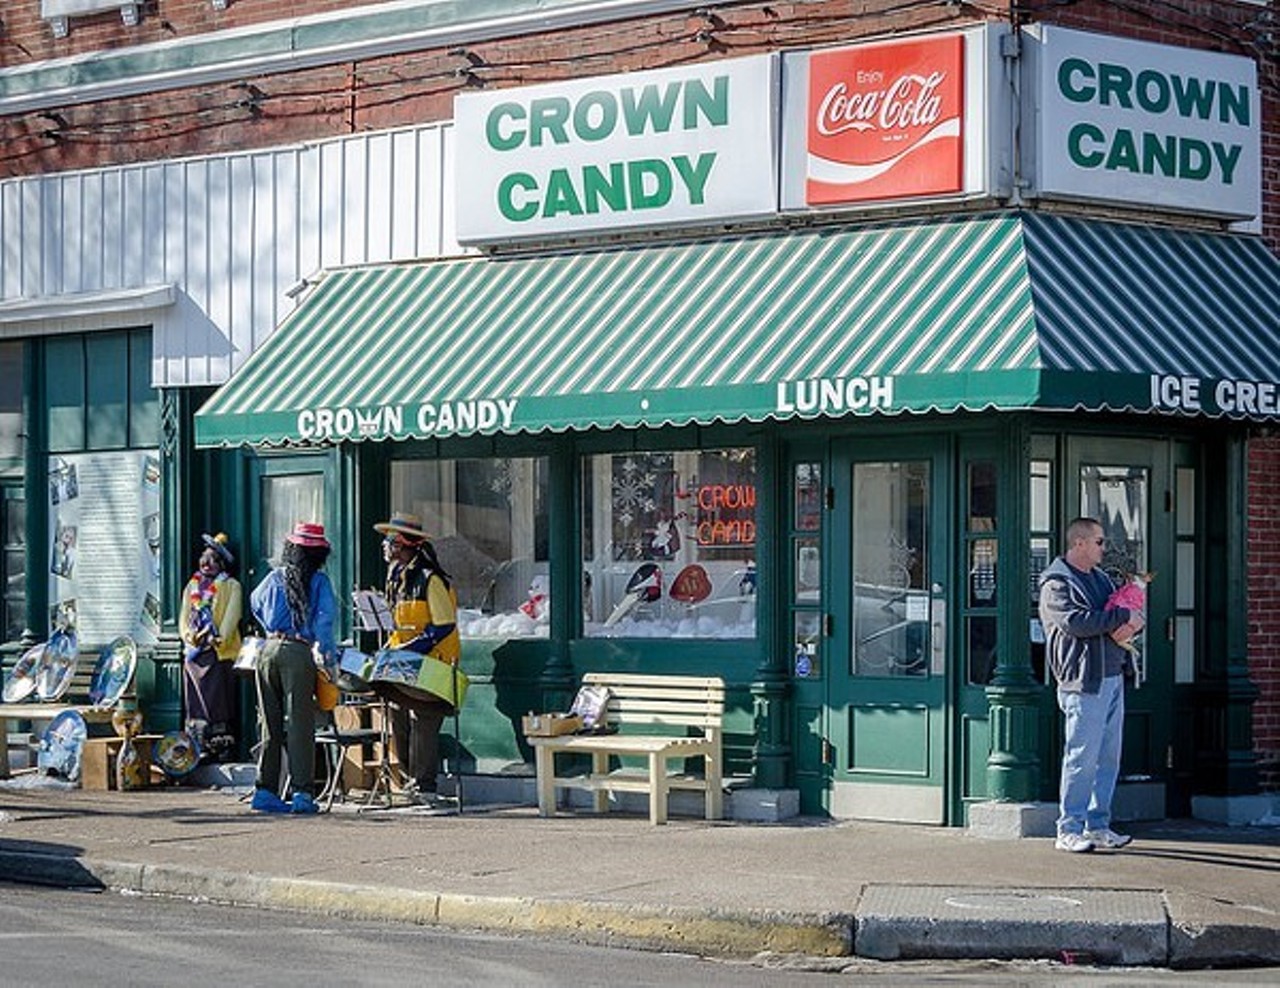 Eat rock candy
For your rock candy (or any other candy needs, really), a true St. Louisan must visit Crown Candy Kitchen.
Photo courtesy of Keith Yahl / Flickr